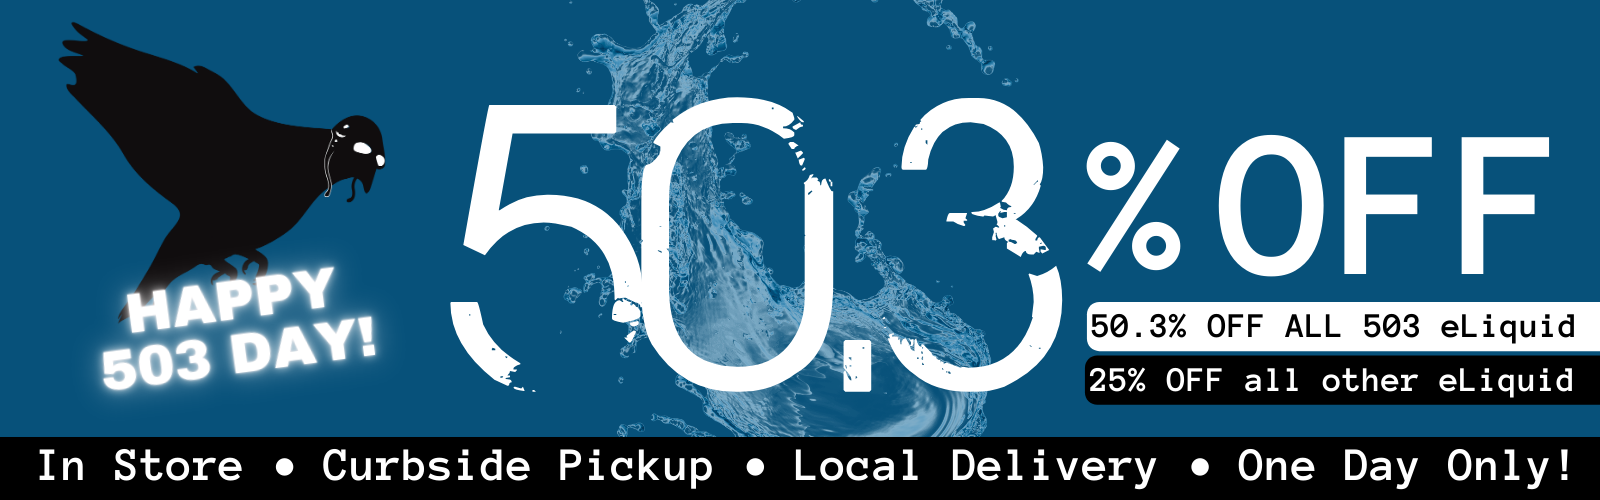 Happy 503 Day 50.3 percent off All 503 eliquid! 25% off all other eliquid. In store. Curbside pickup. Local Delivery. One Day Only!